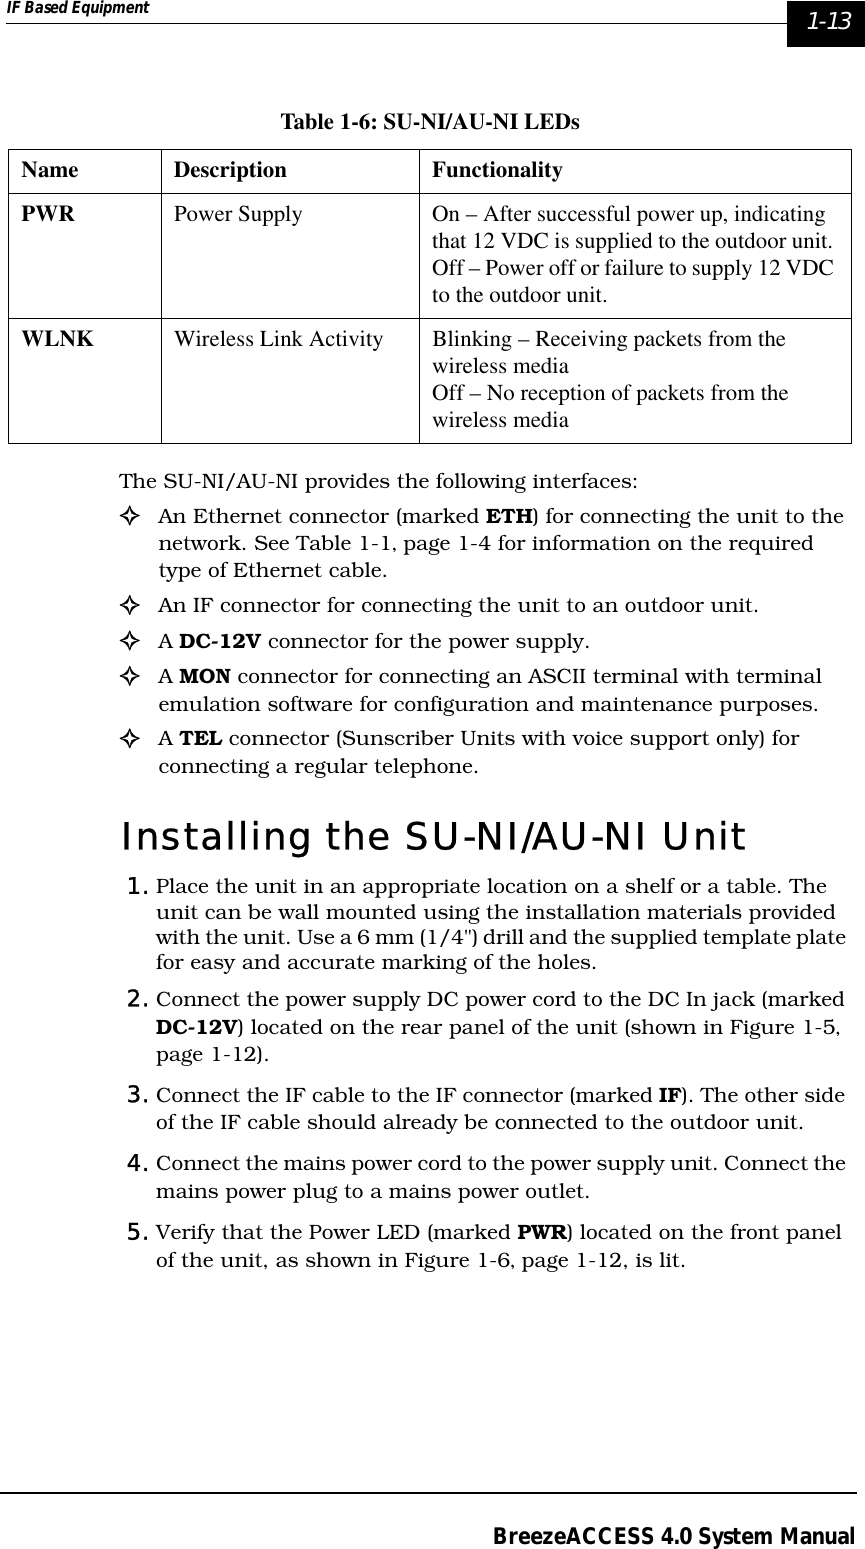 IF Based Equipment  1-13BreezeACCESS 4.0 System ManualThe SU-NI/AU-NI provides the following interfaces:!An Ethernet connector (marked ETH) for connecting the unit to the network. See Table 1-1‚ page 1-4 for information on the required type of Ethernet cable.!An IF connector for connecting the unit to an outdoor unit. !A DC-12V connector for the power supply.!A MON connector for connecting an ASCII terminal with terminal emulation software for configuration and maintenance purposes.!A TEL connector (Sunscriber Units with voice support only) for connecting a regular telephone.Installing the SU-NI/AU-NI Unit1. Place the unit in an appropriate location on a shelf or a table. The unit can be wall mounted using the installation materials provided with the unit. Use a 6 mm (1/4&quot;) drill and the supplied template plate for easy and accurate marking of the holes. 2. Connect the power supply DC power cord to the DC In jack (marked DC-12V) located on the rear panel of the unit (shown in Figure 1-5‚ page 1-12).3. Connect the IF cable to the IF connector (marked IF). The other side of the IF cable should already be connected to the outdoor unit.4. Connect the mains power cord to the power supply unit. Connect the mains power plug to a mains power outlet.5. Verify that the Power LED (marked PWR) located on the front panel of the unit, as shown in Figure 1-6‚ page 1-12, is lit.Table 1-6: SU-NI/AU-NI LEDsName Description FunctionalityPWR Power Supply On – After successful power up, indicating that 12 VDC is supplied to the outdoor unit. Off – Power off or failure to supply 12 VDC to the outdoor unit.WLNK Wireless Link Activity Blinking – Receiving packets from the wireless mediaOff – No reception of packets from the wireless media